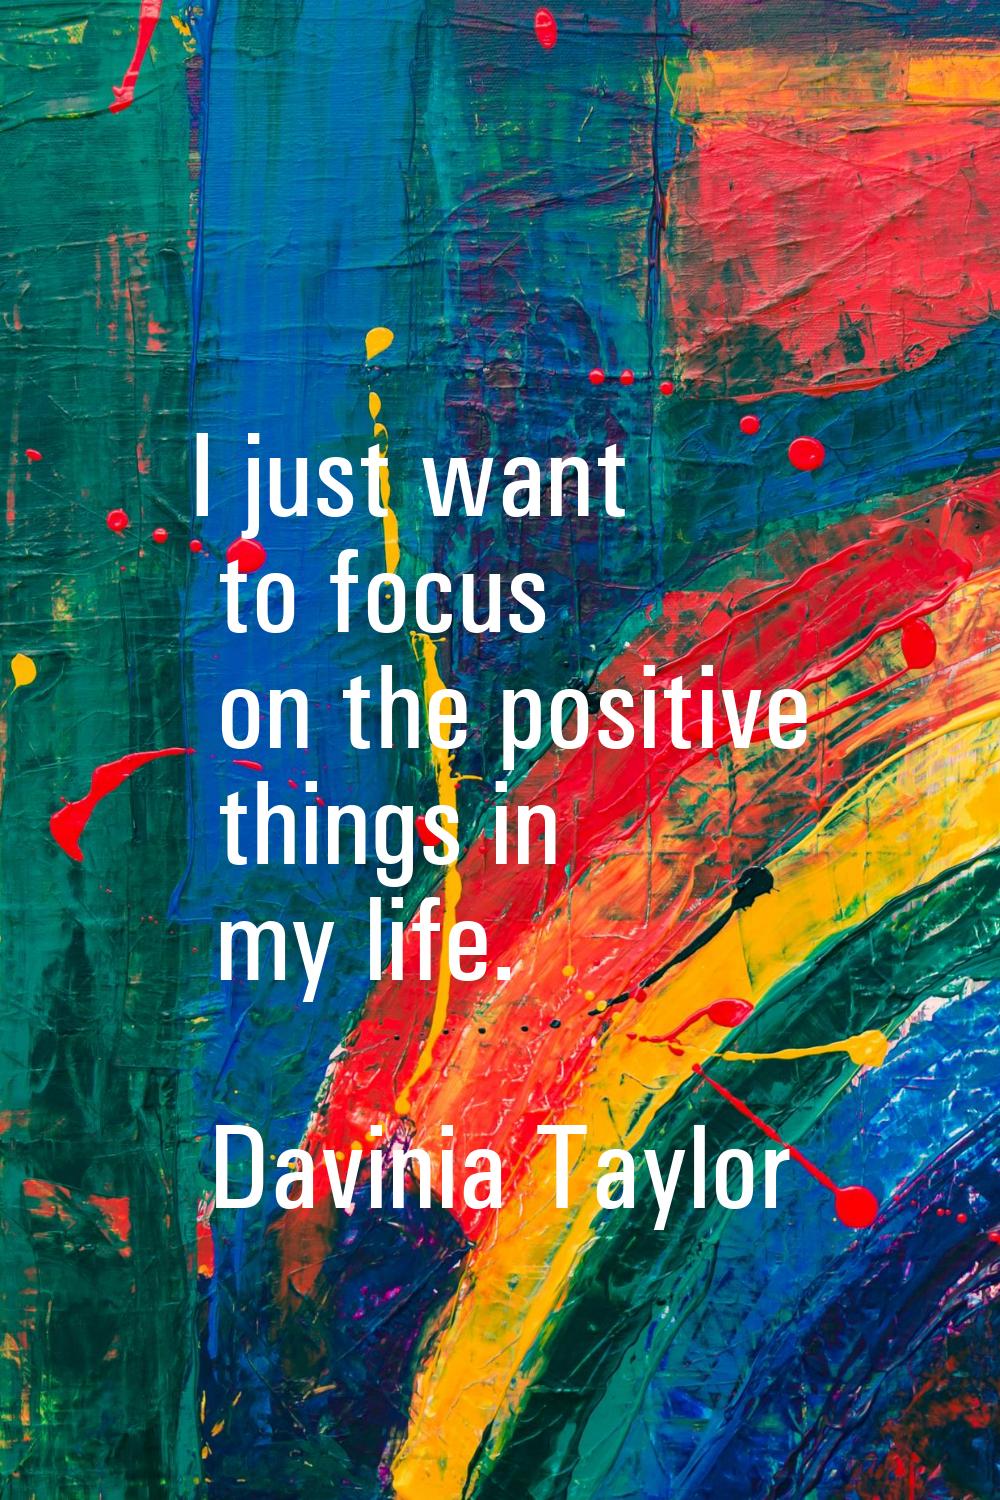 I just want to focus on the positive things in my life.